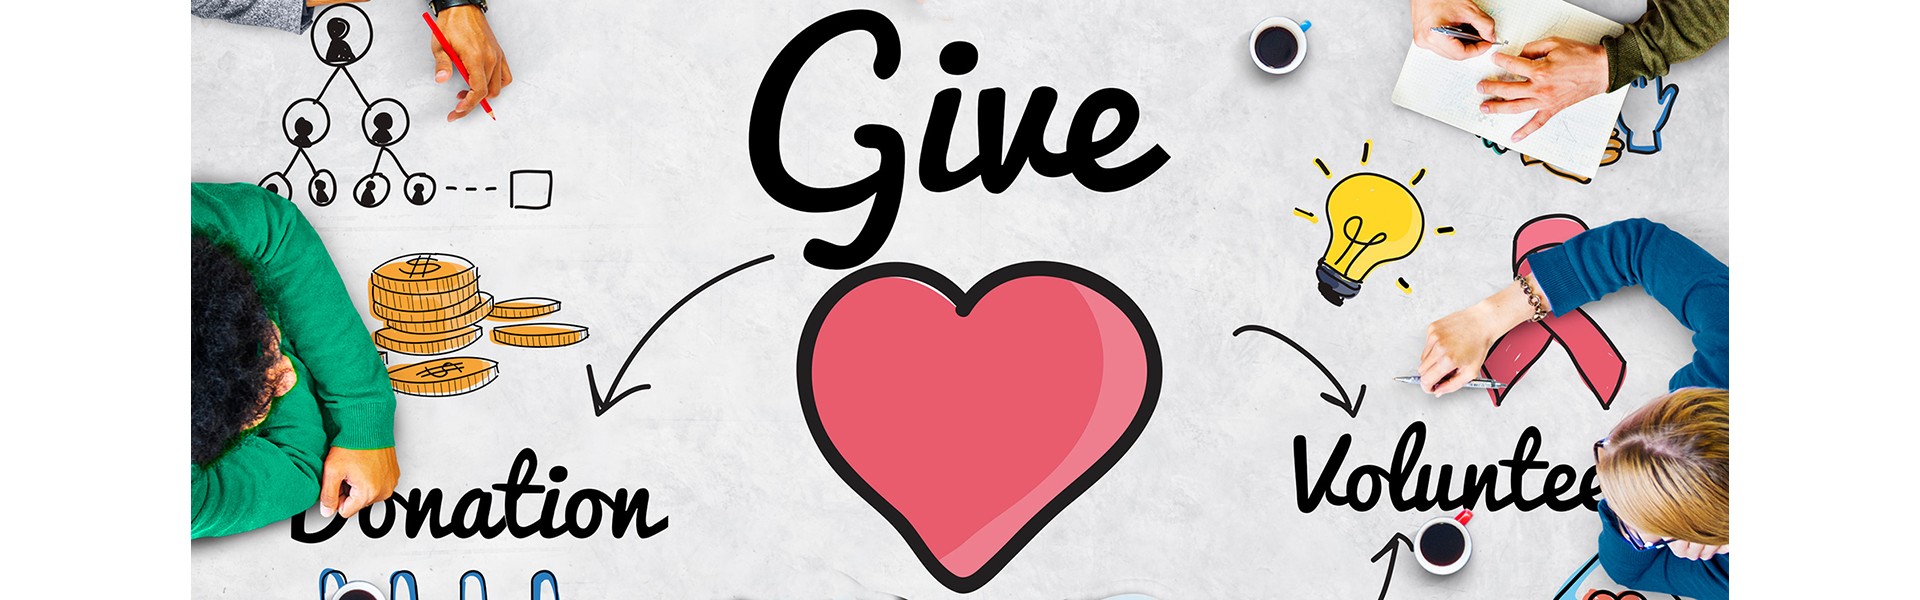 graphic about giving